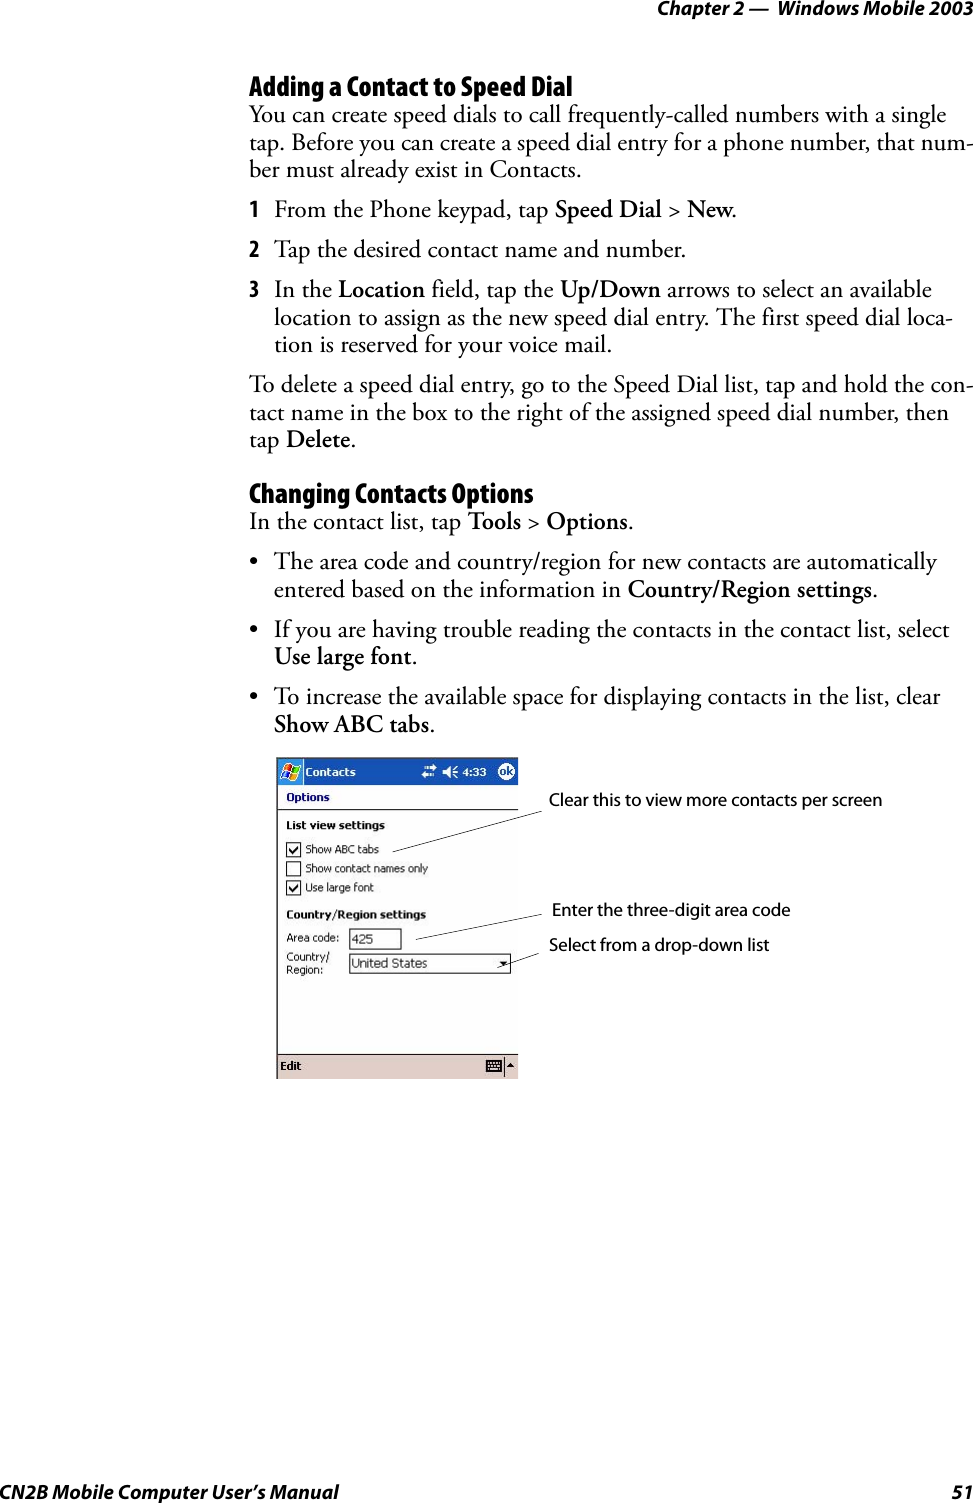 Chapter 2 —  Windows Mobile 2003CN2B Mobile Computer User’s Manual 51Adding a Contact to Speed DialYou can create speed dials to call frequently-called numbers with a single tap. Before you can create a speed dial entry for a phone number, that num-ber must already exist in Contacts.1From the Phone keypad, tap Speed Dial &gt; New.2Tap the desired contact name and number.3In the Location field, tap the Up/Down arrows to select an available location to assign as the new speed dial entry. The first speed dial loca-tion is reserved for your voice mail.To delete a speed dial entry, go to the Speed Dial list, tap and hold the con-tact name in the box to the right of the assigned speed dial number, then tap Delete.Changing Contacts OptionsIn the contact list, tap Tools &gt; Options.• The area code and country/region for new contacts are automatically entered based on the information in Country/Region settings.• If you are having trouble reading the contacts in the contact list, select Use large font.• To increase the available space for displaying contacts in the list, clear Show ABC tabs.Clear this to view more contacts per screenEnter the three-digit area codeSelect from a drop-down list